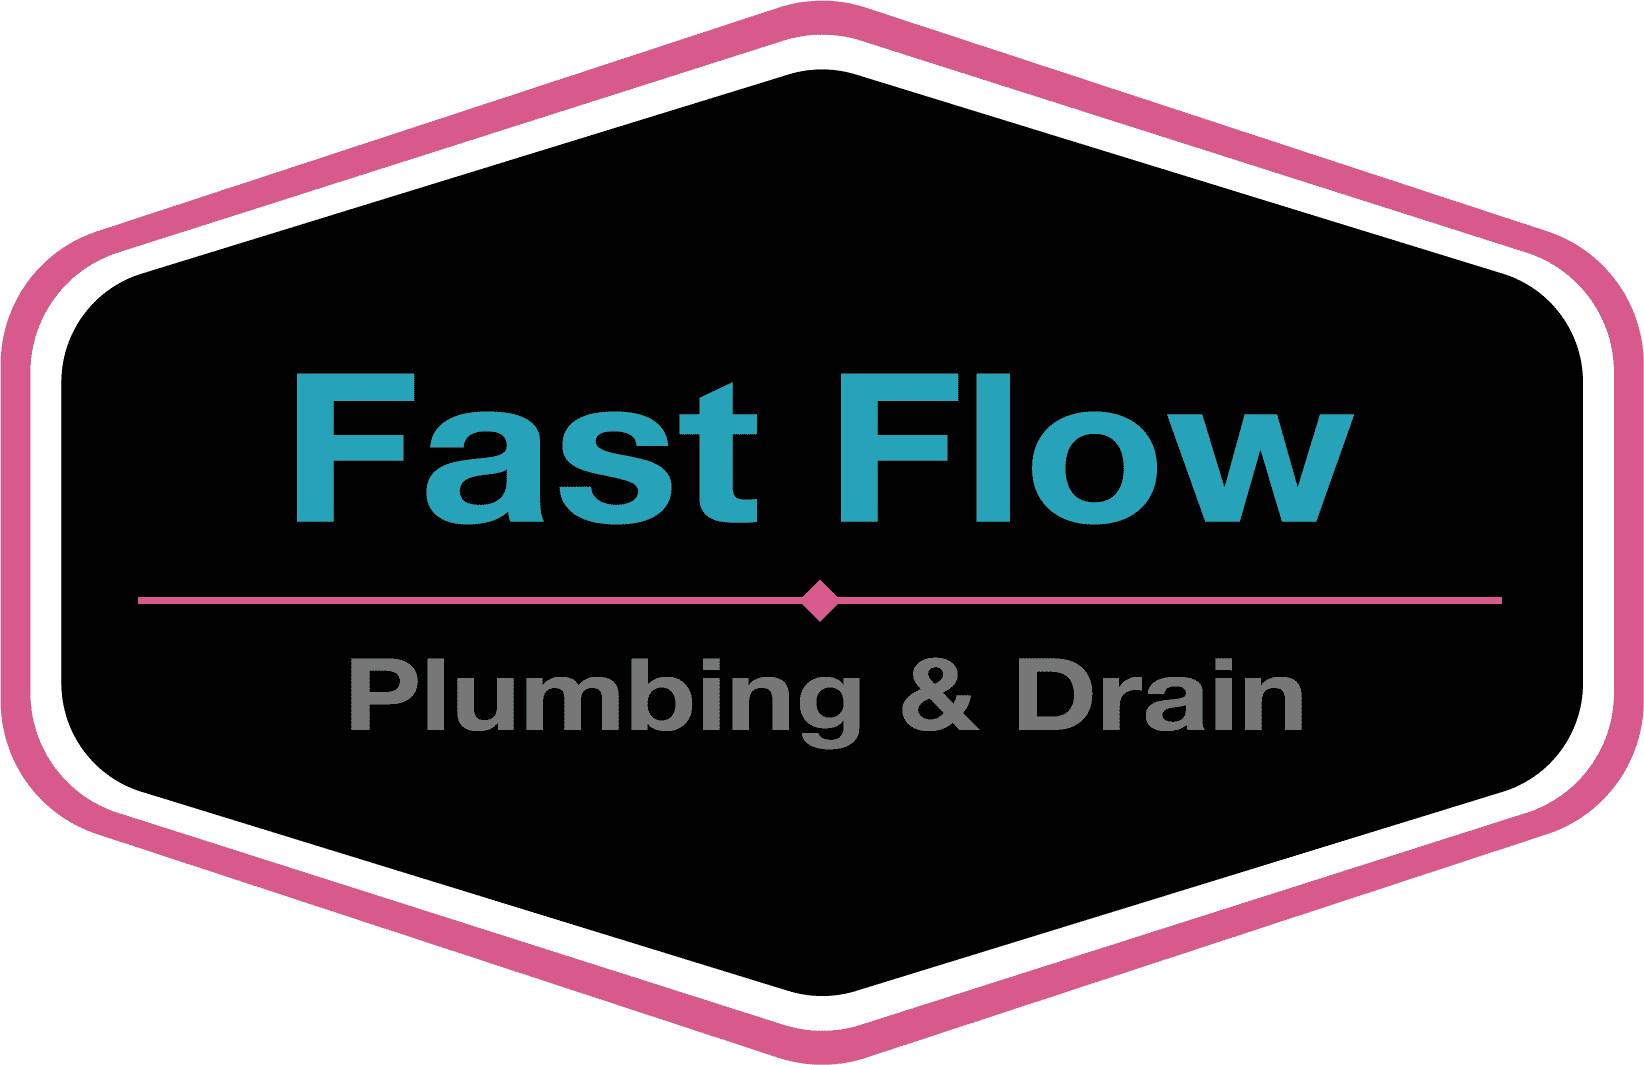 Fast Flow Plumbing & Drain LLC Introduces New Website to Better Serve Customers 1